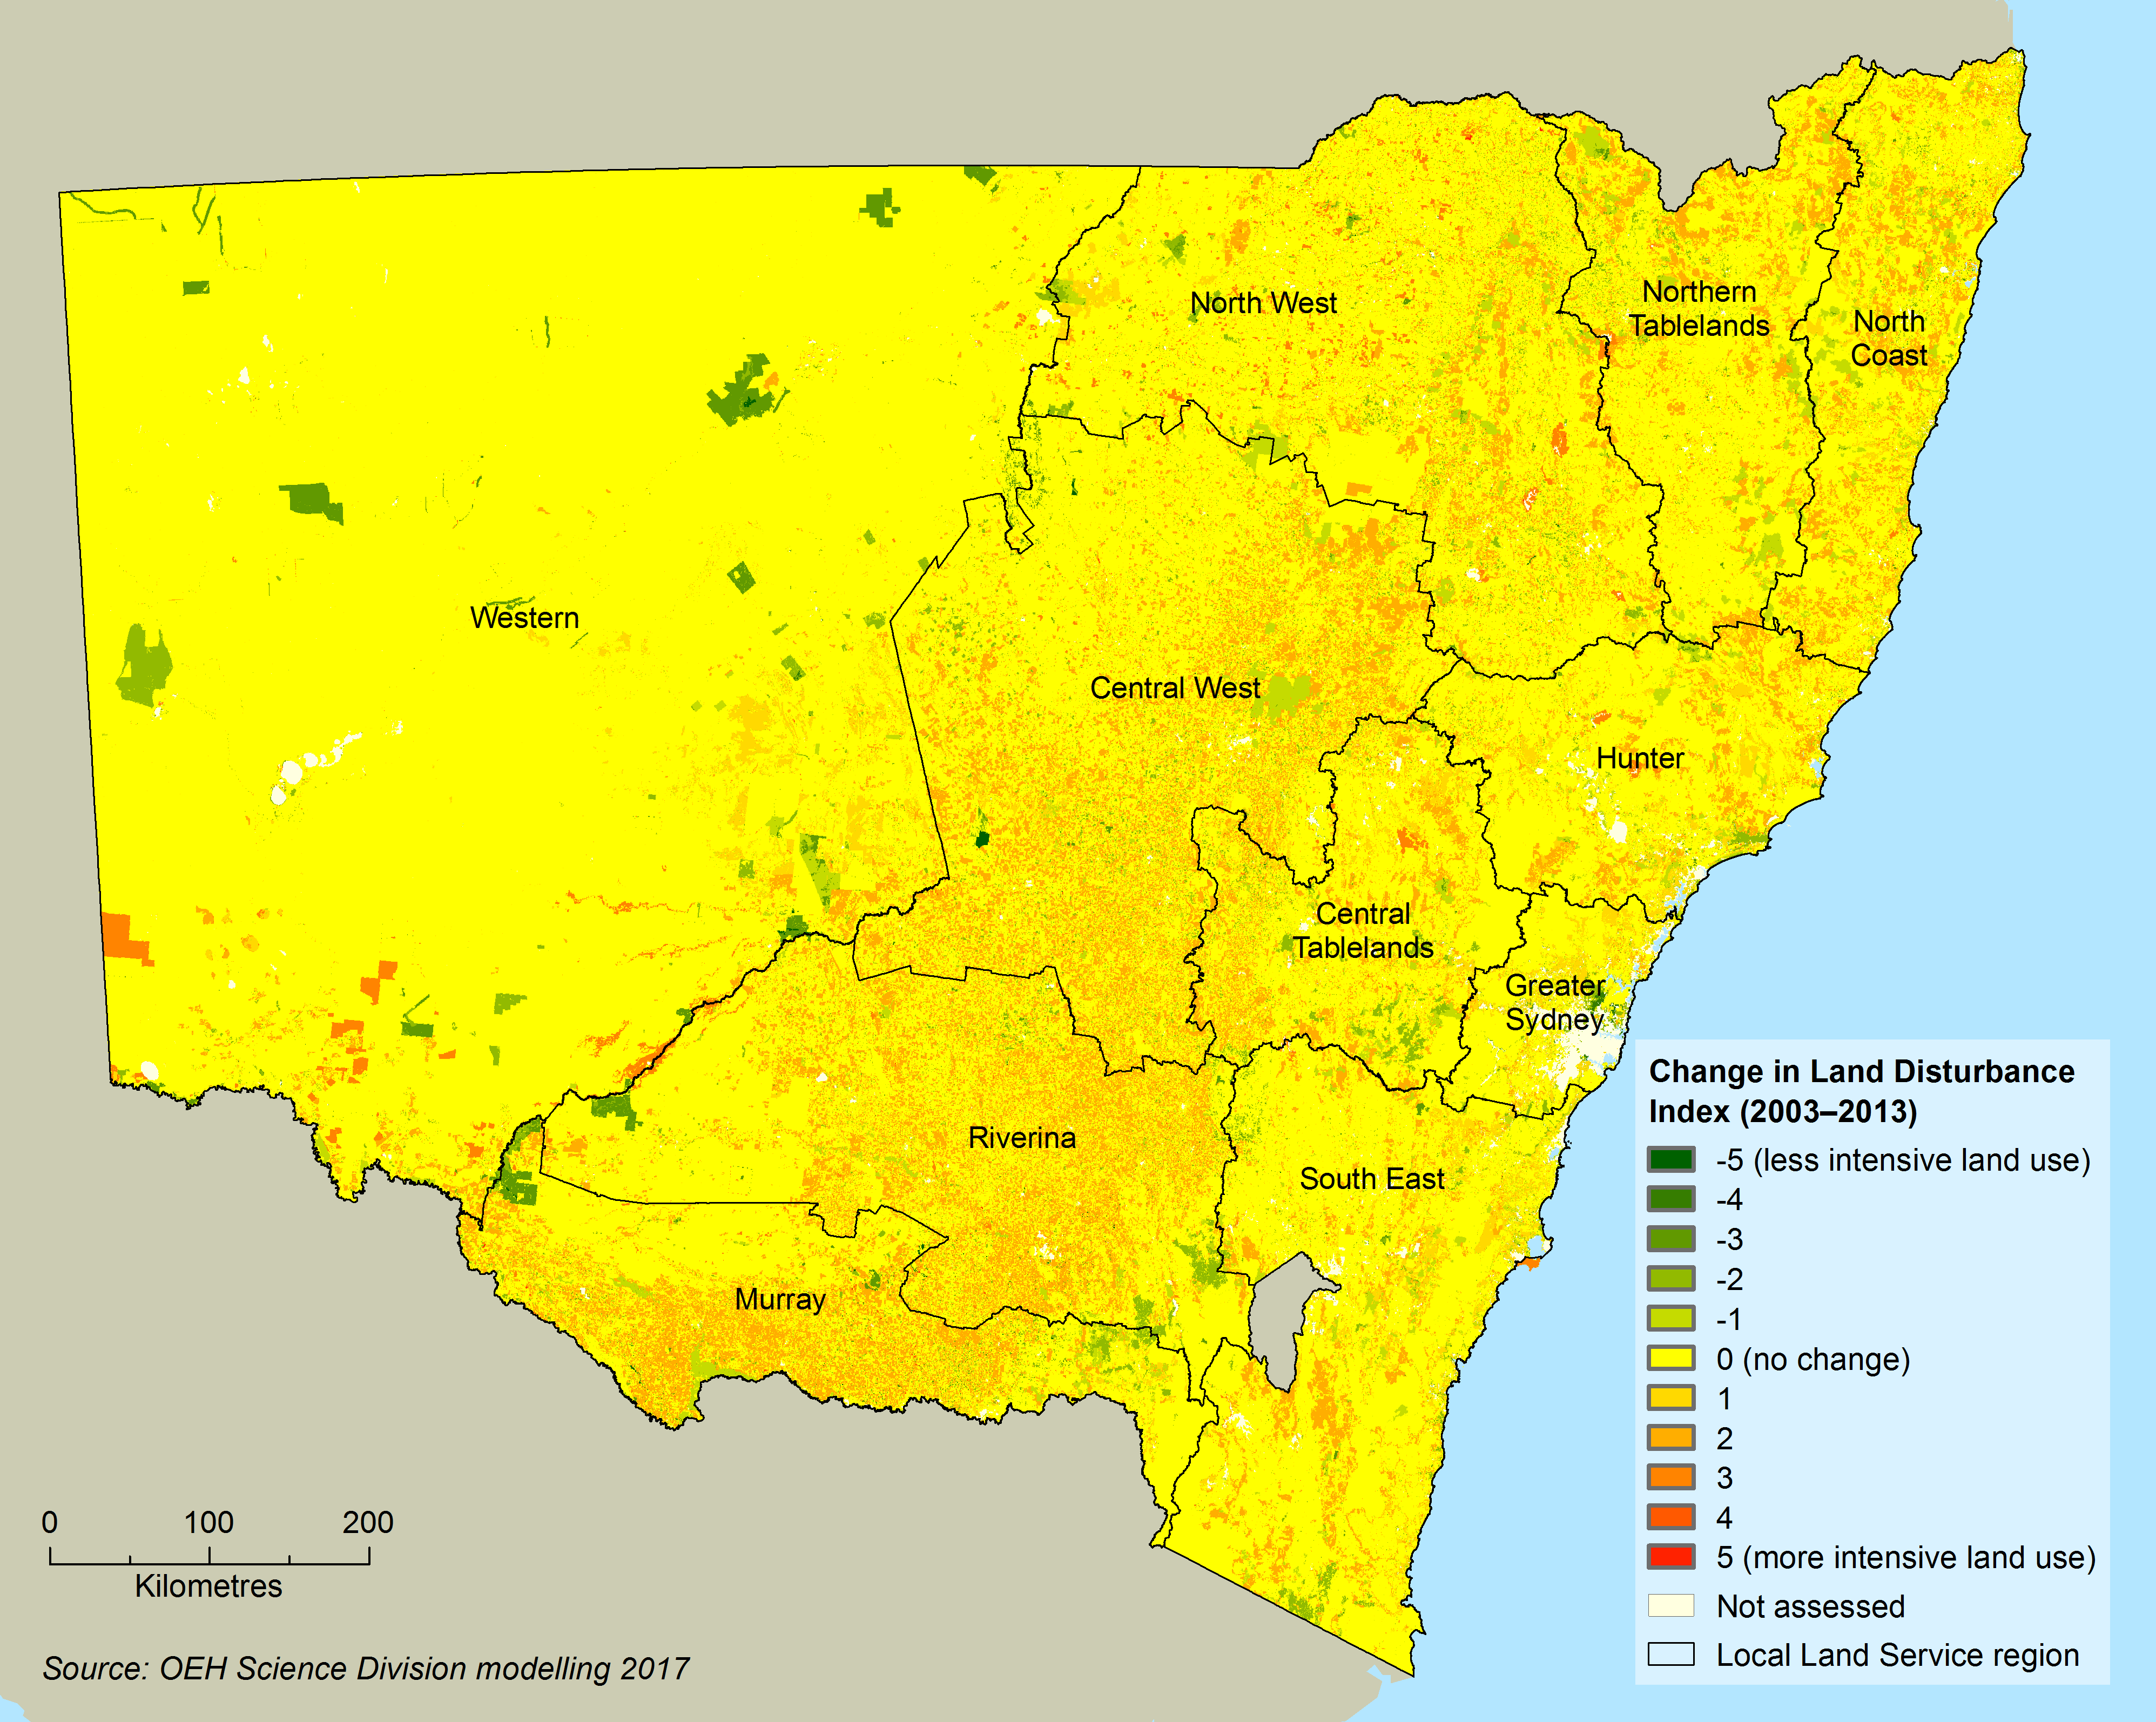 Map showing change in the land disturbance index over the last 10 years across NSW. Slight changes are evident in the central agricultural regions of NSW